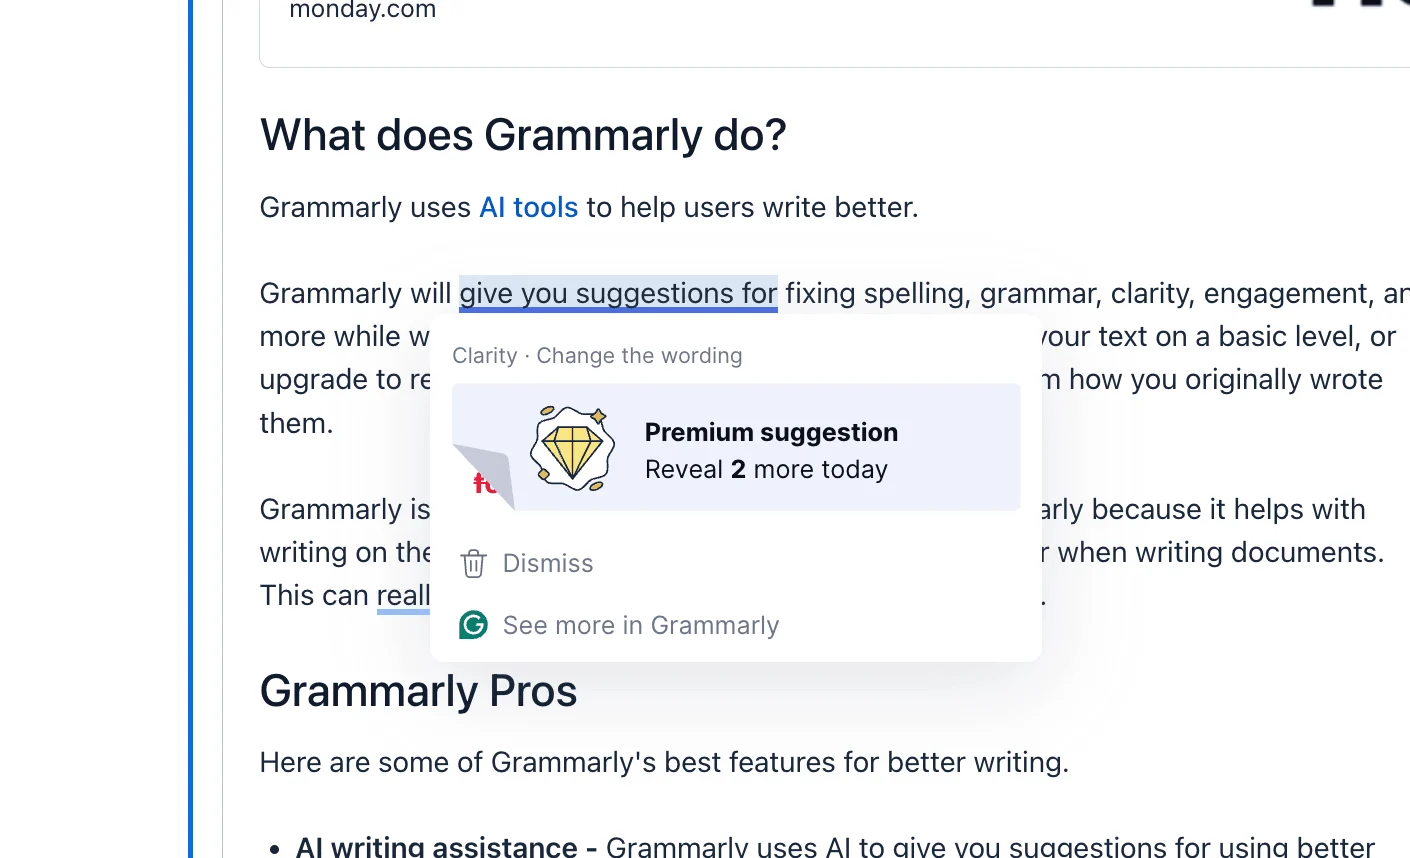 Grammarly Content Editing